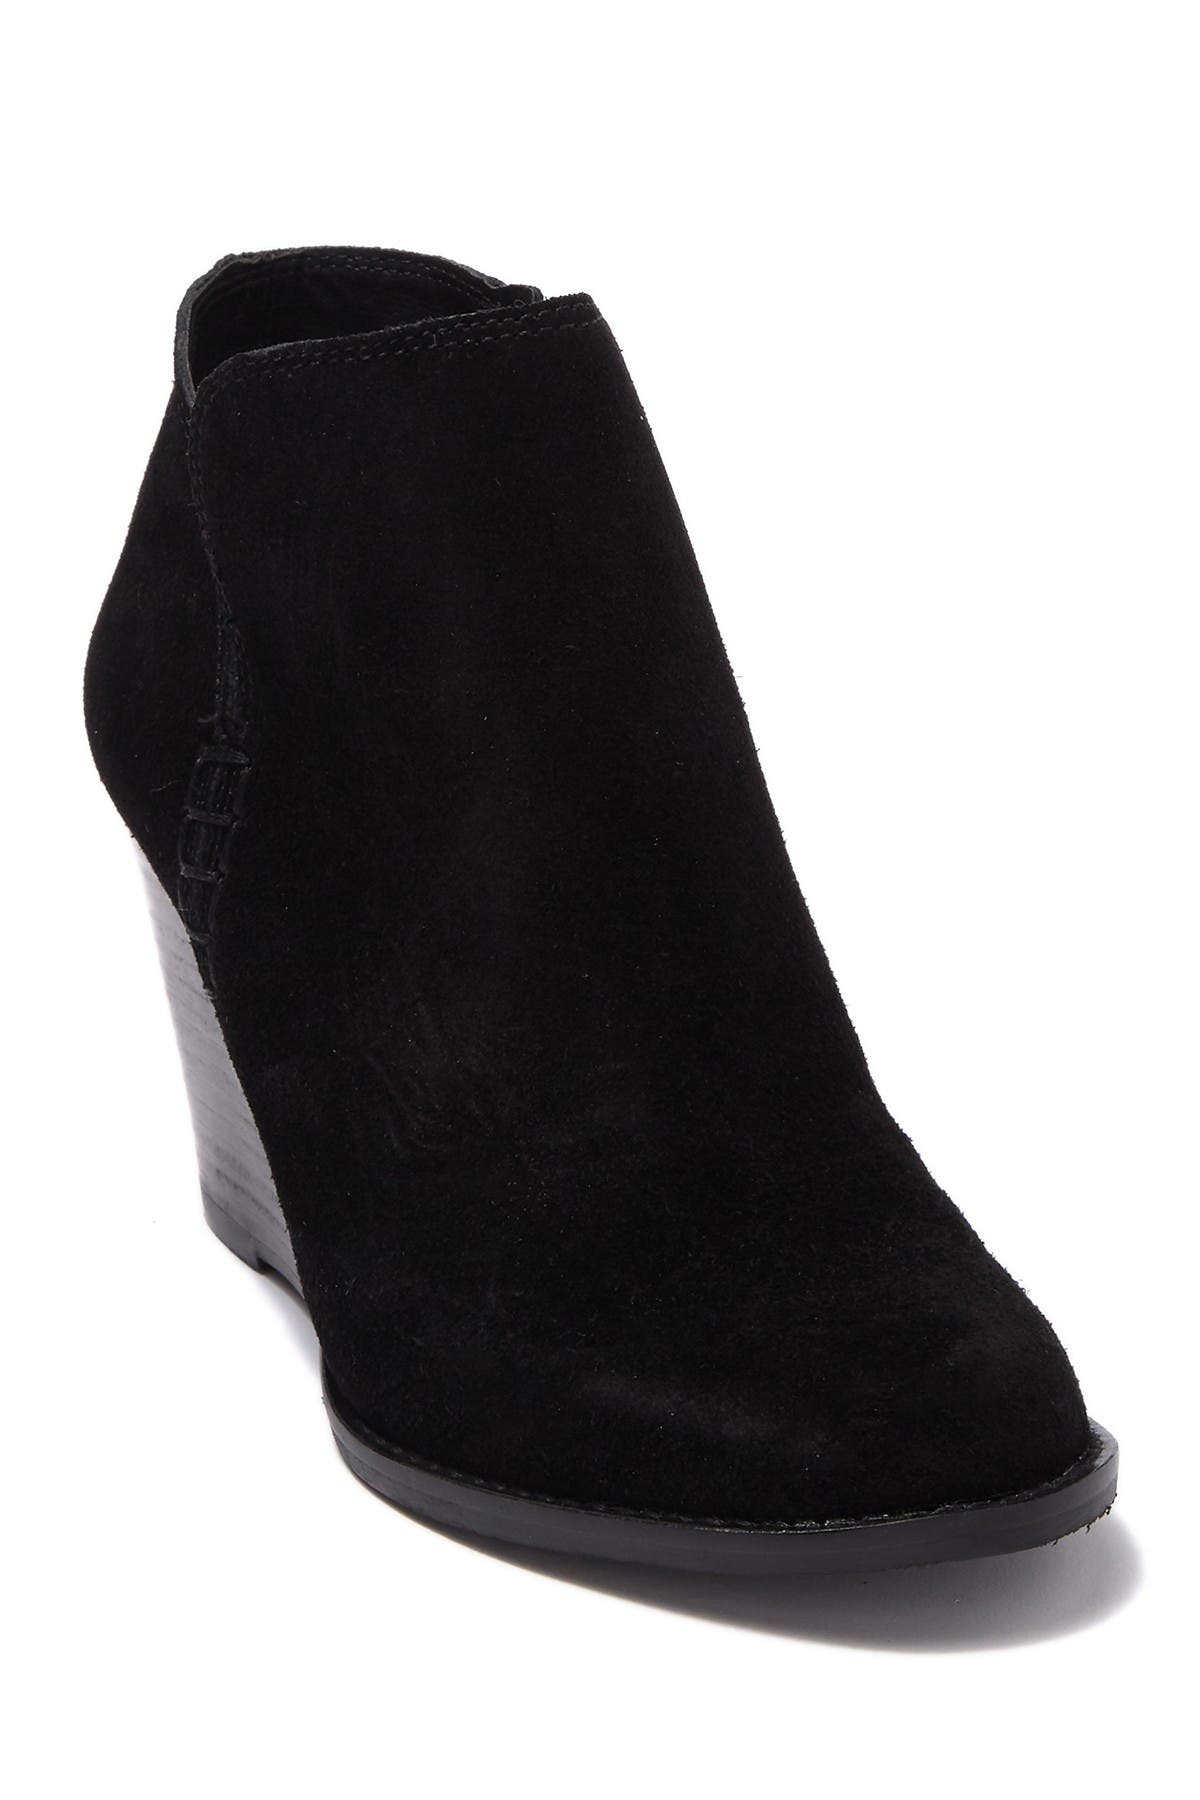 lucky brand yimme wedge bootie